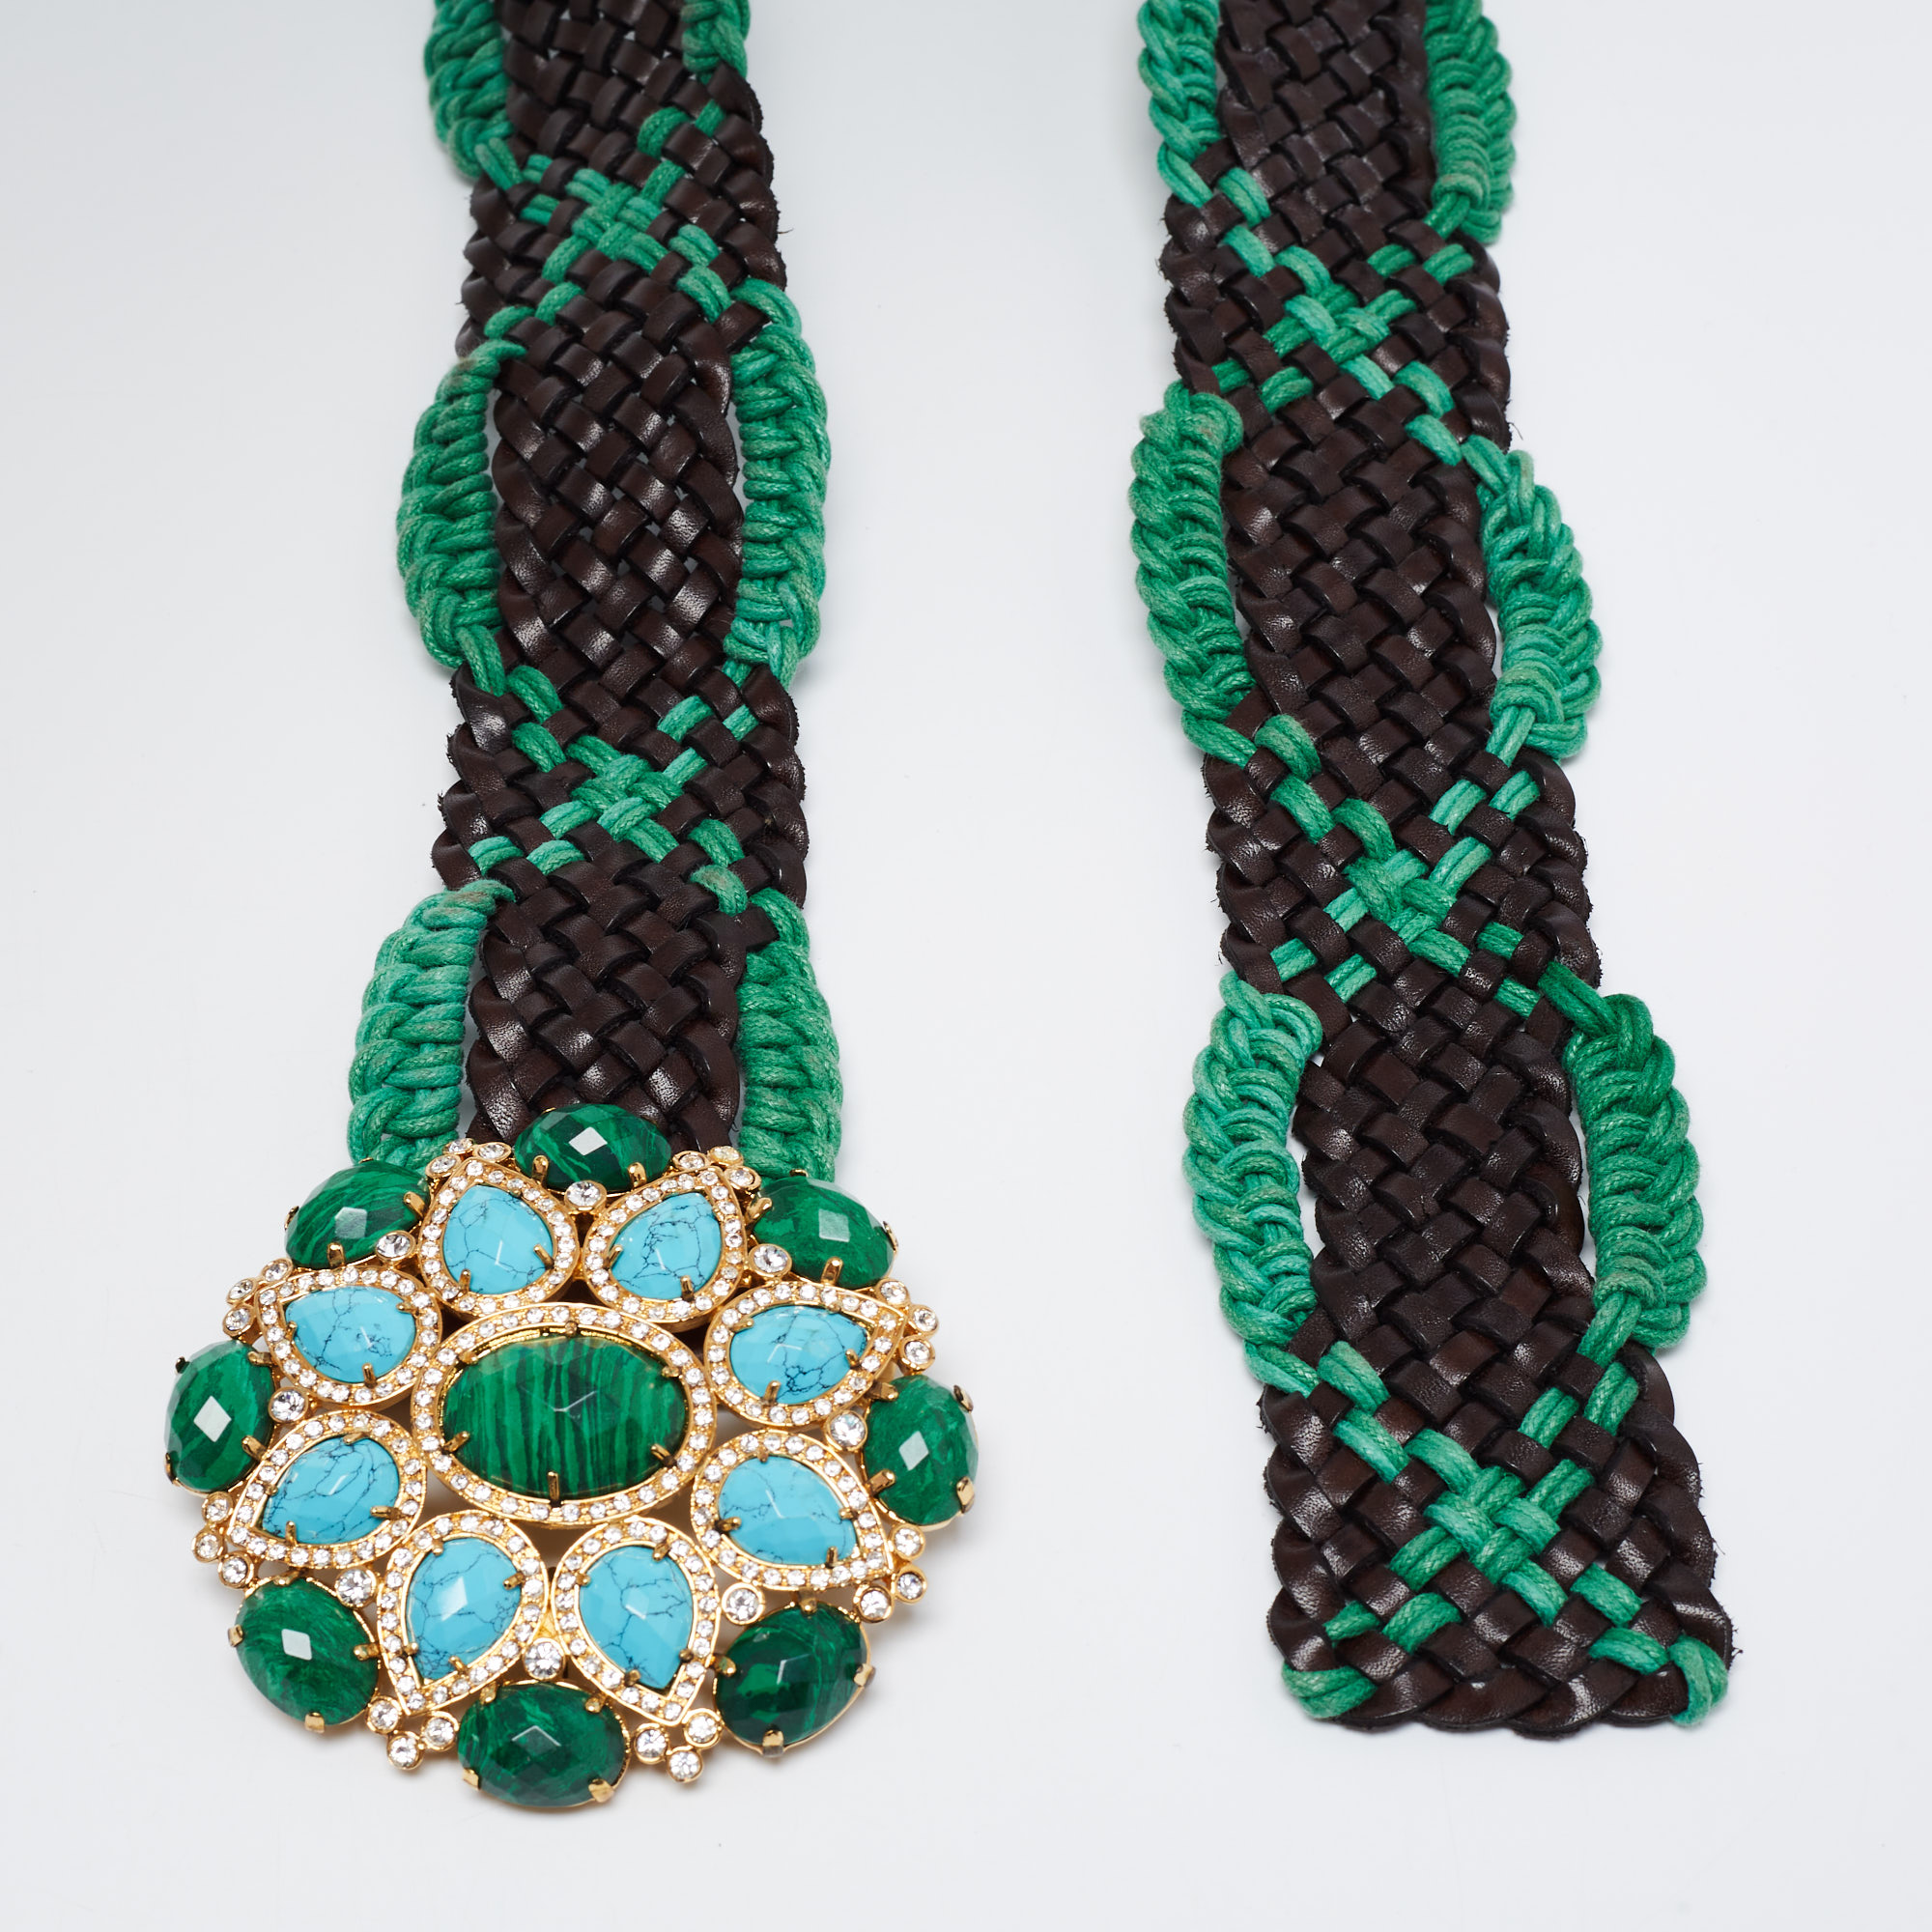 

Roberto Cavalli Green/Brown Braided Fabric and Leather Embellished Belt